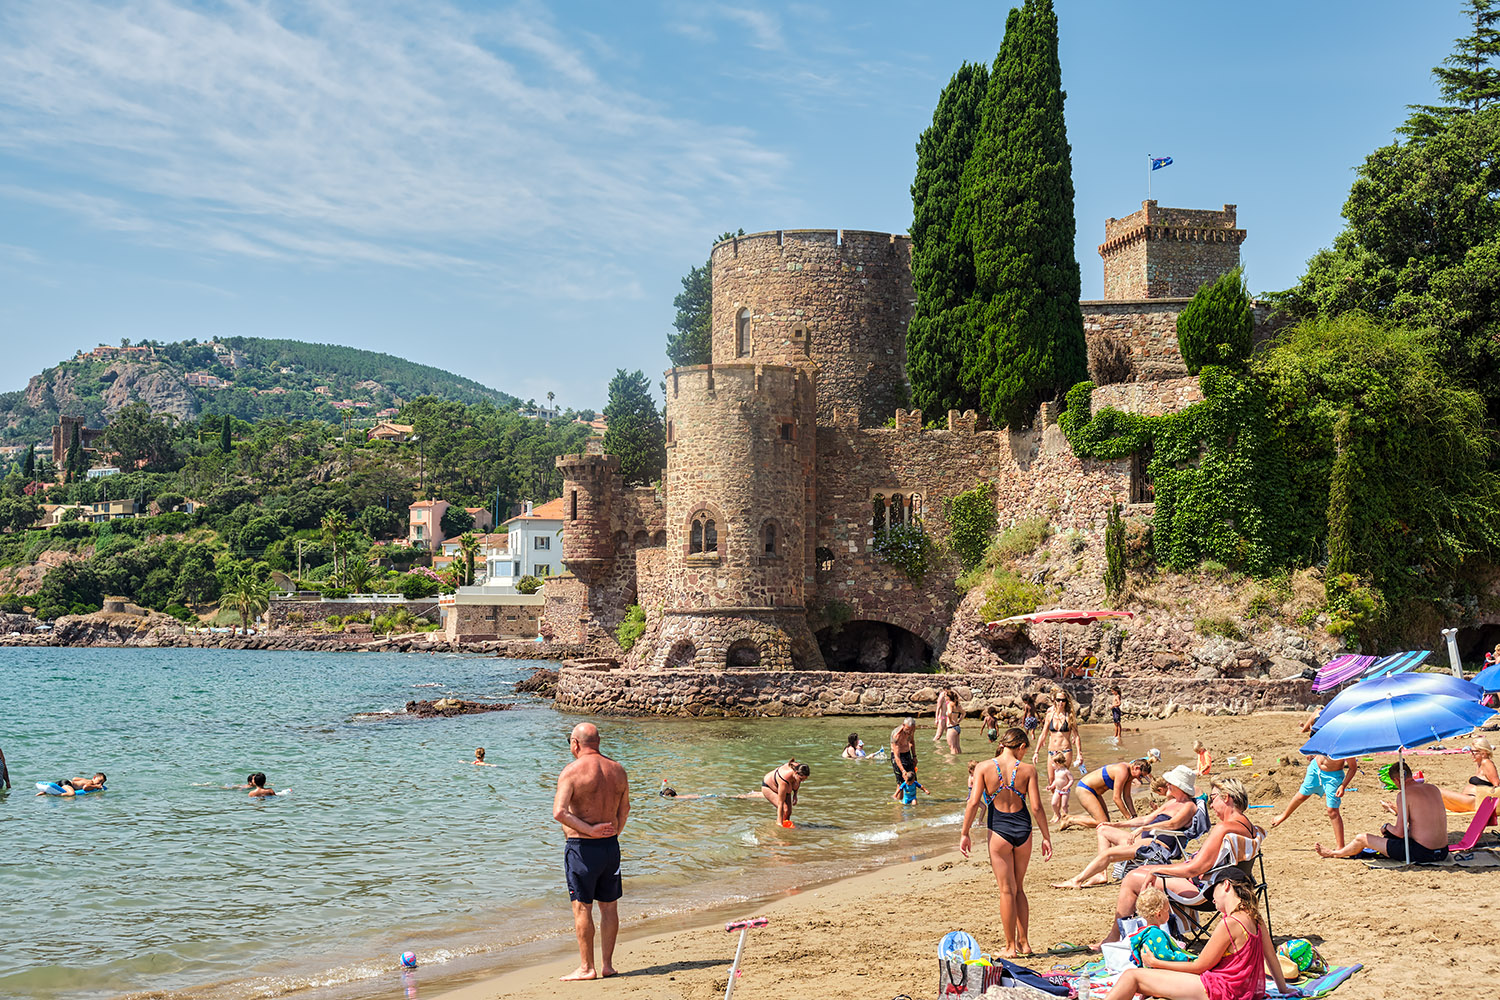 The small beach next to the harbor of Mandelieu–La Napoule and a first look at the castle